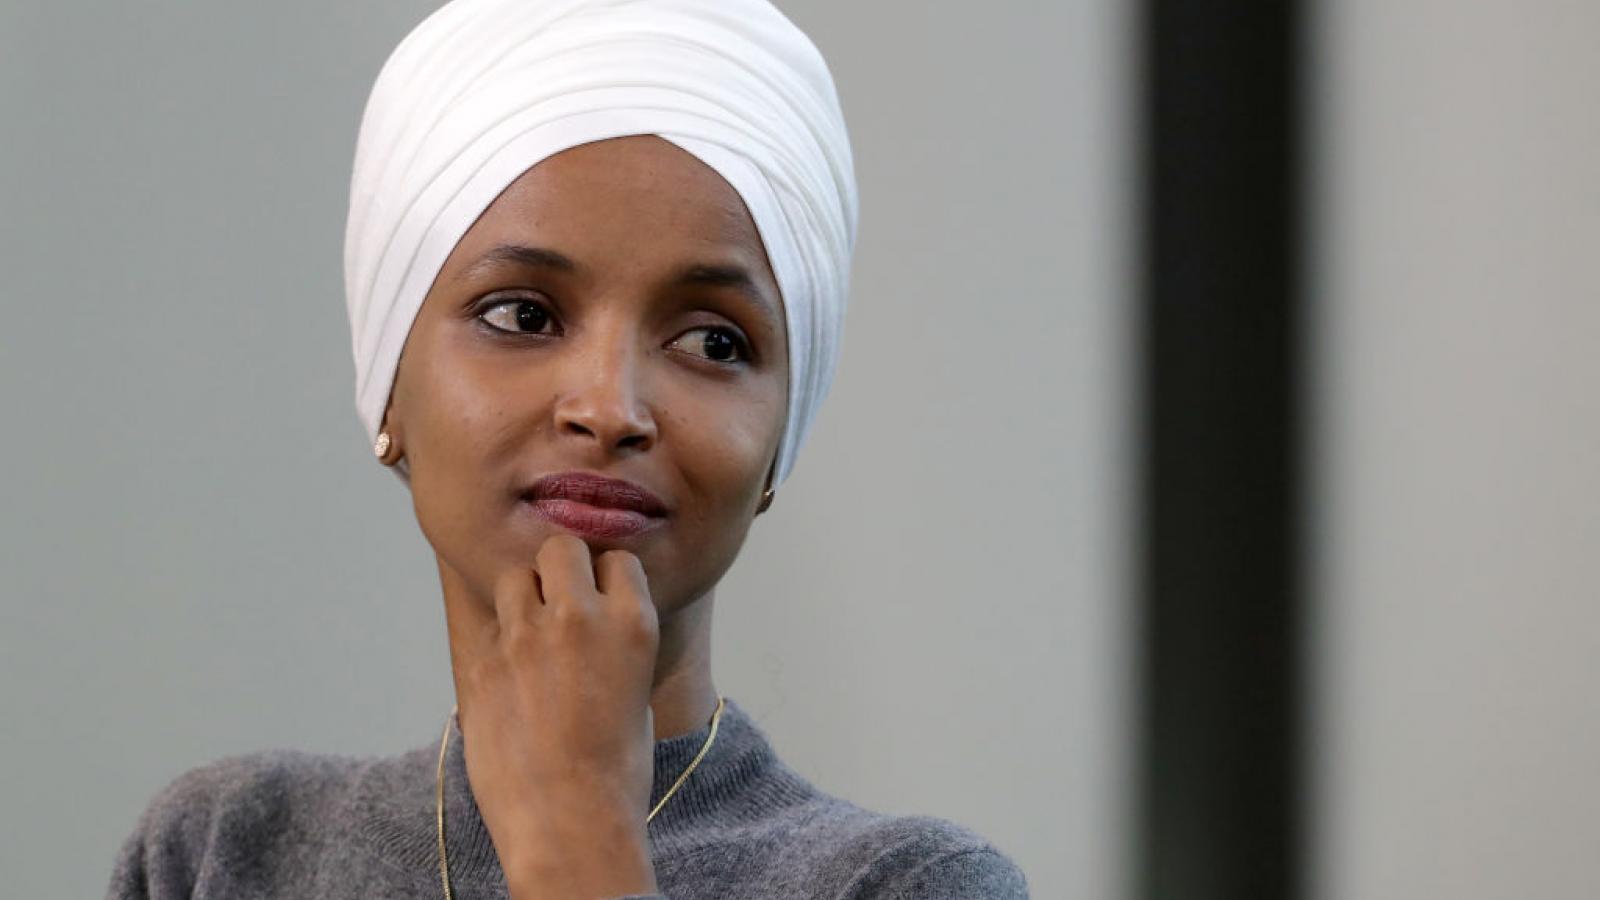 Congresswoman Omar Continues To Pay Large Campaign Funds To Her Husbands Firm Just The News